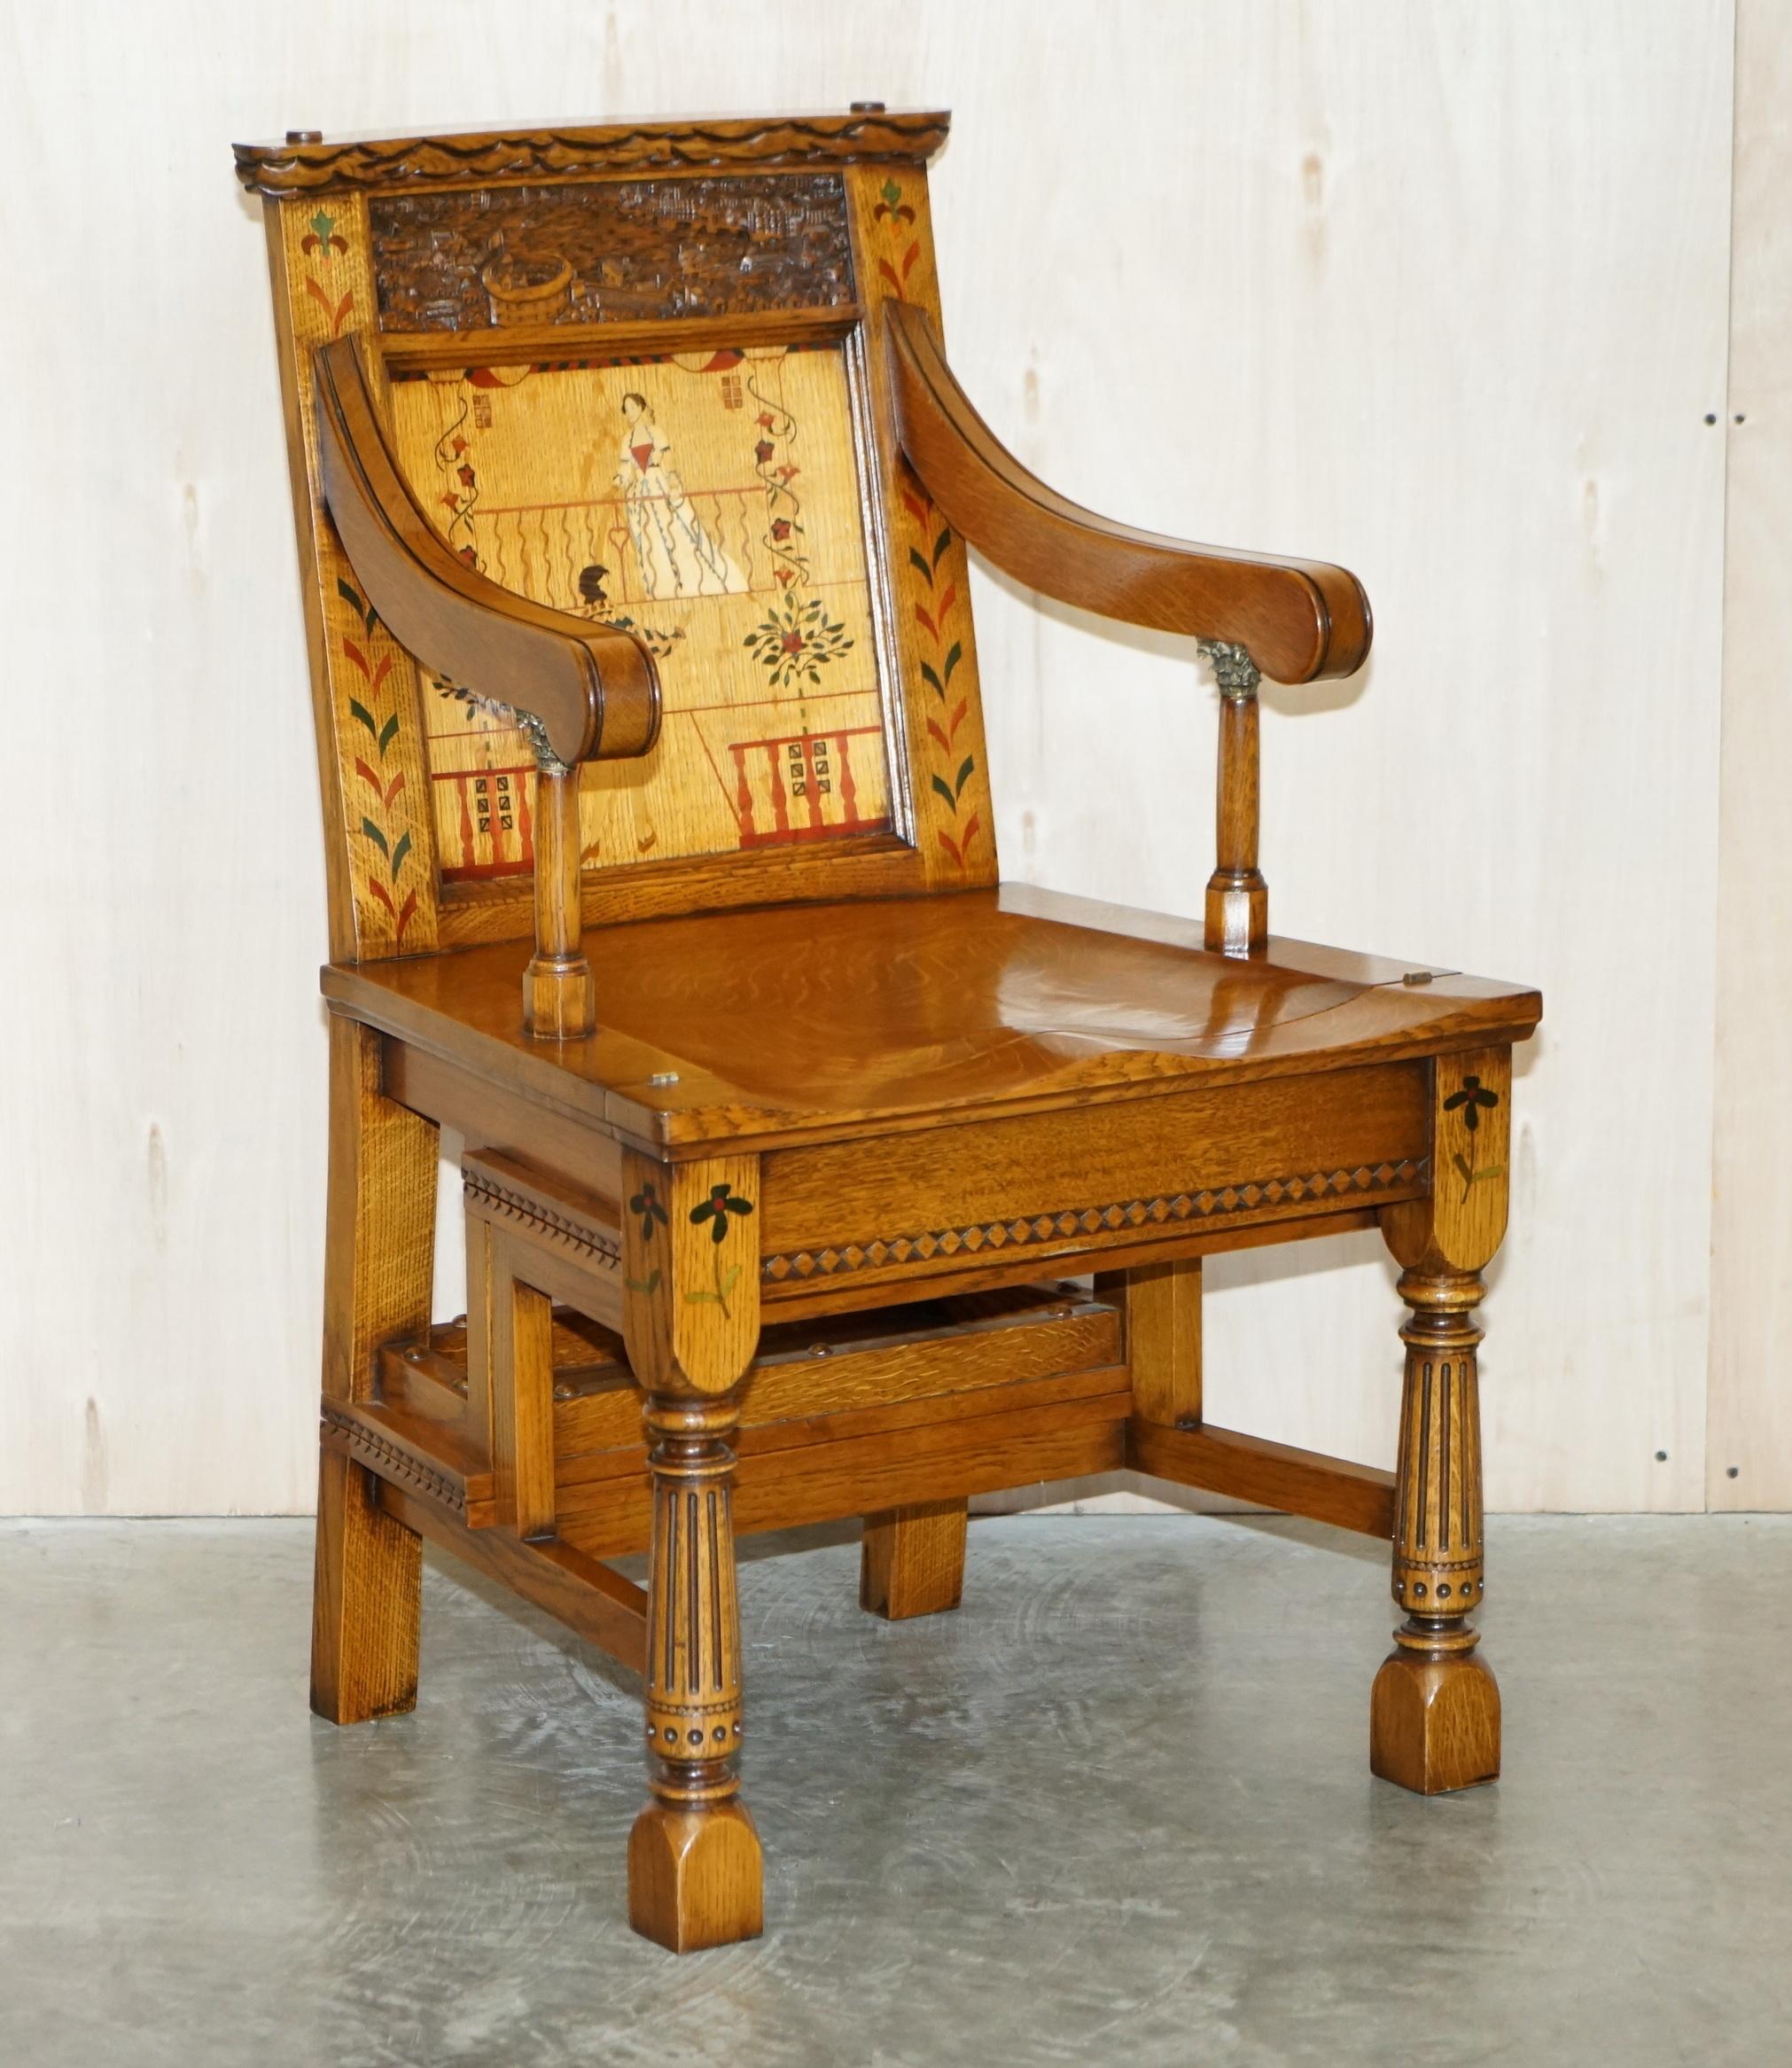 We are delighted to offer for sale this absolutely stunning, highly collectable, Limited Edition 52/150 Steward Linford William Shakespeare Metamorphic library steps armchair made from Historic Oak and Pewter from Shakespeare Warwickshire, exhibited